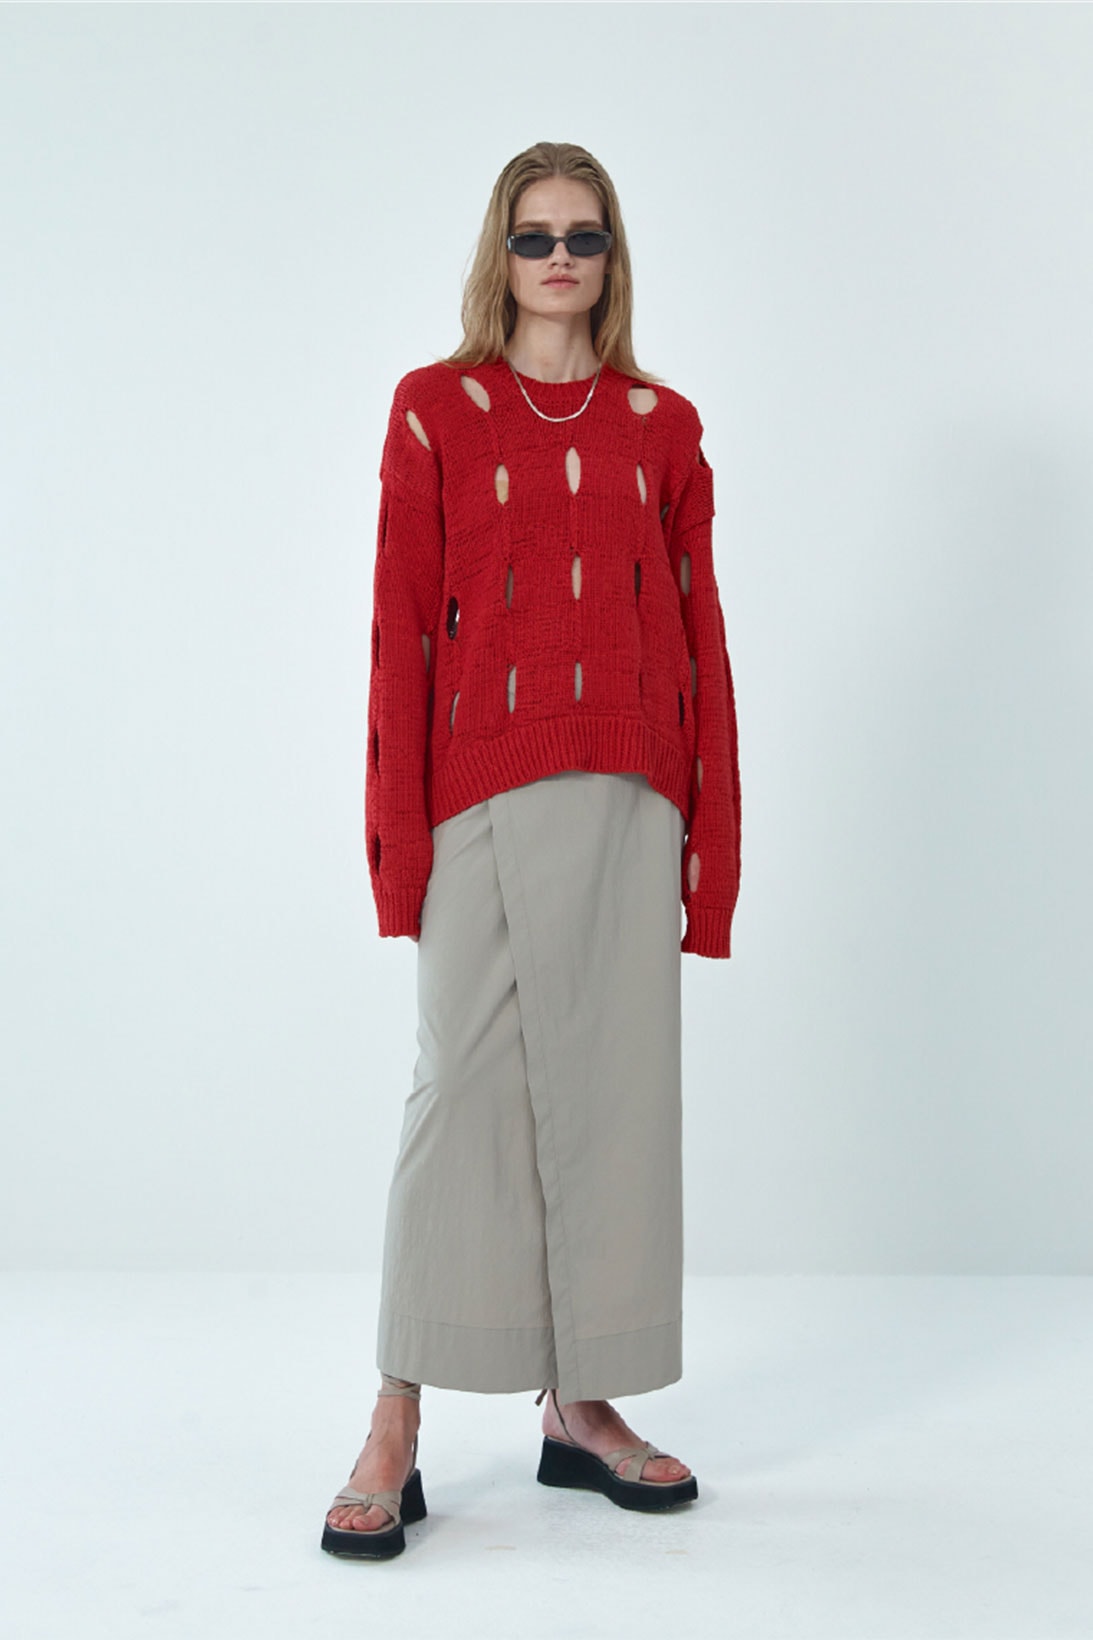 theopen product spring summer 2021 ss21 collection lookbook red sweater knitwear